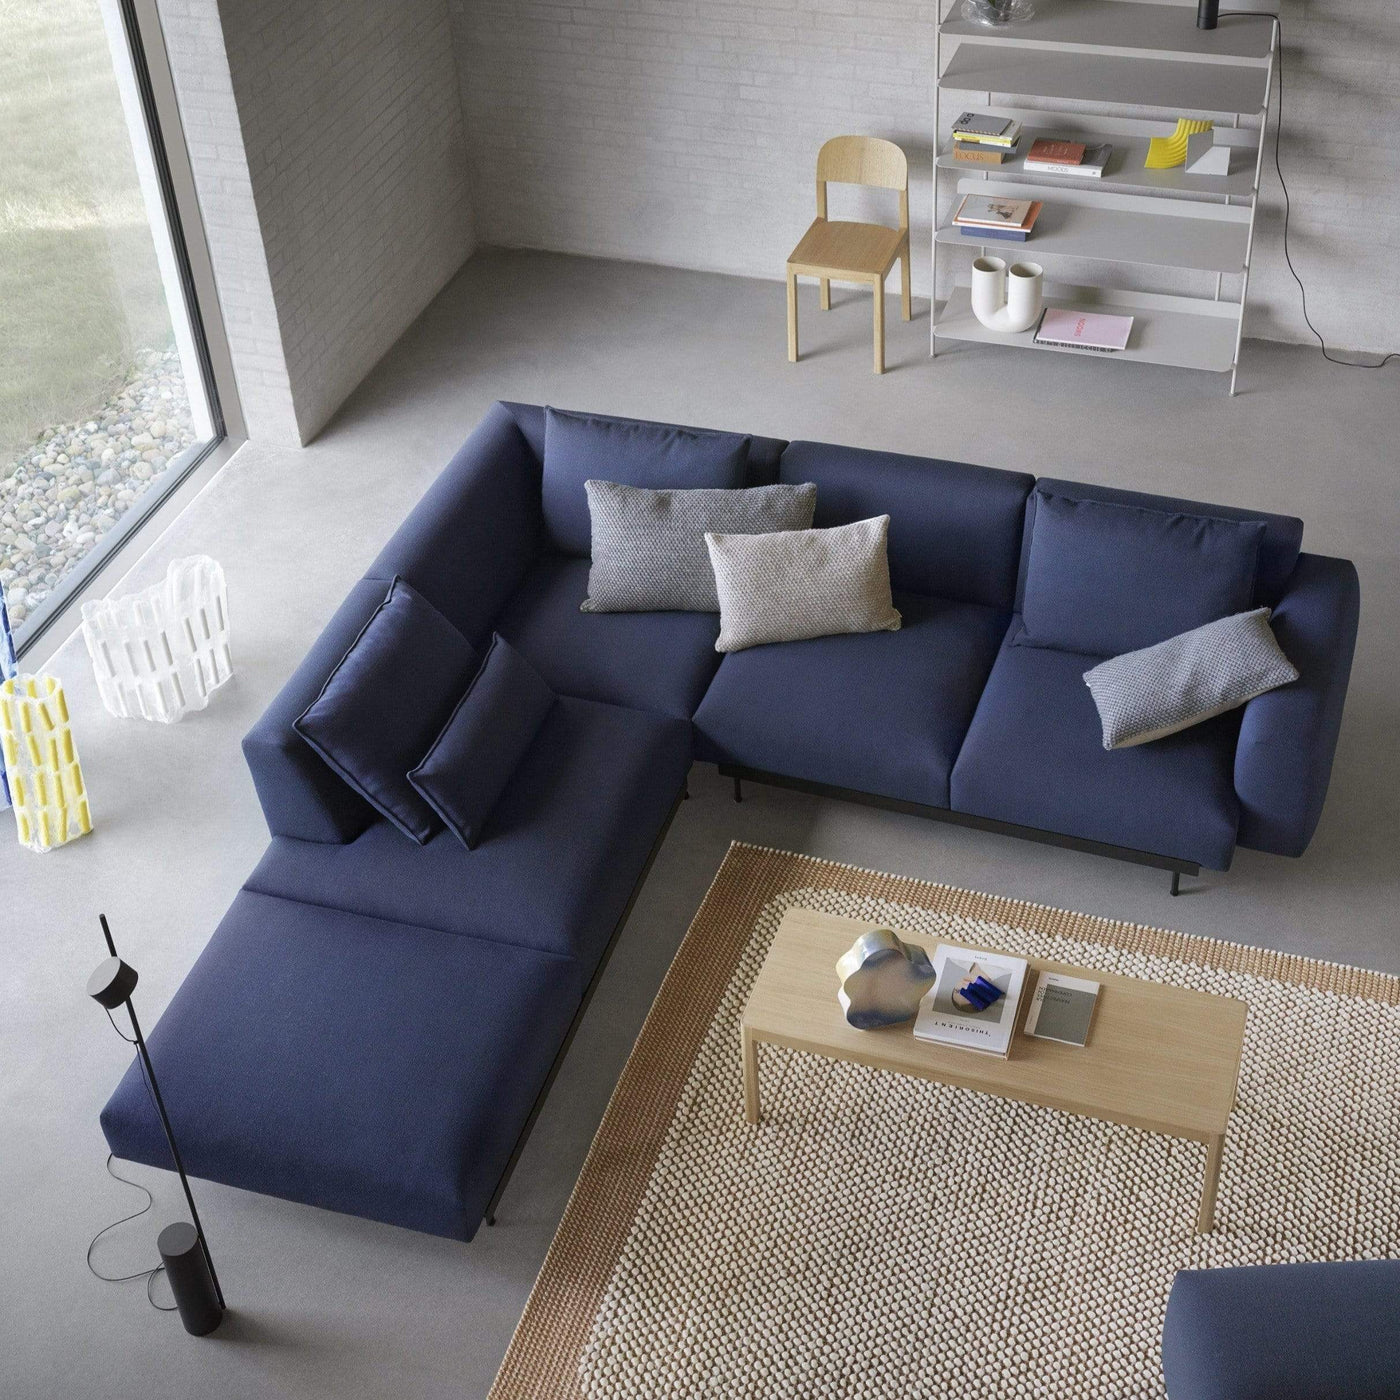 Muuto In Situ Corner Sofa configuration 2 in Vidar 554. Available made to order from someday designs. #colour_vidar-554